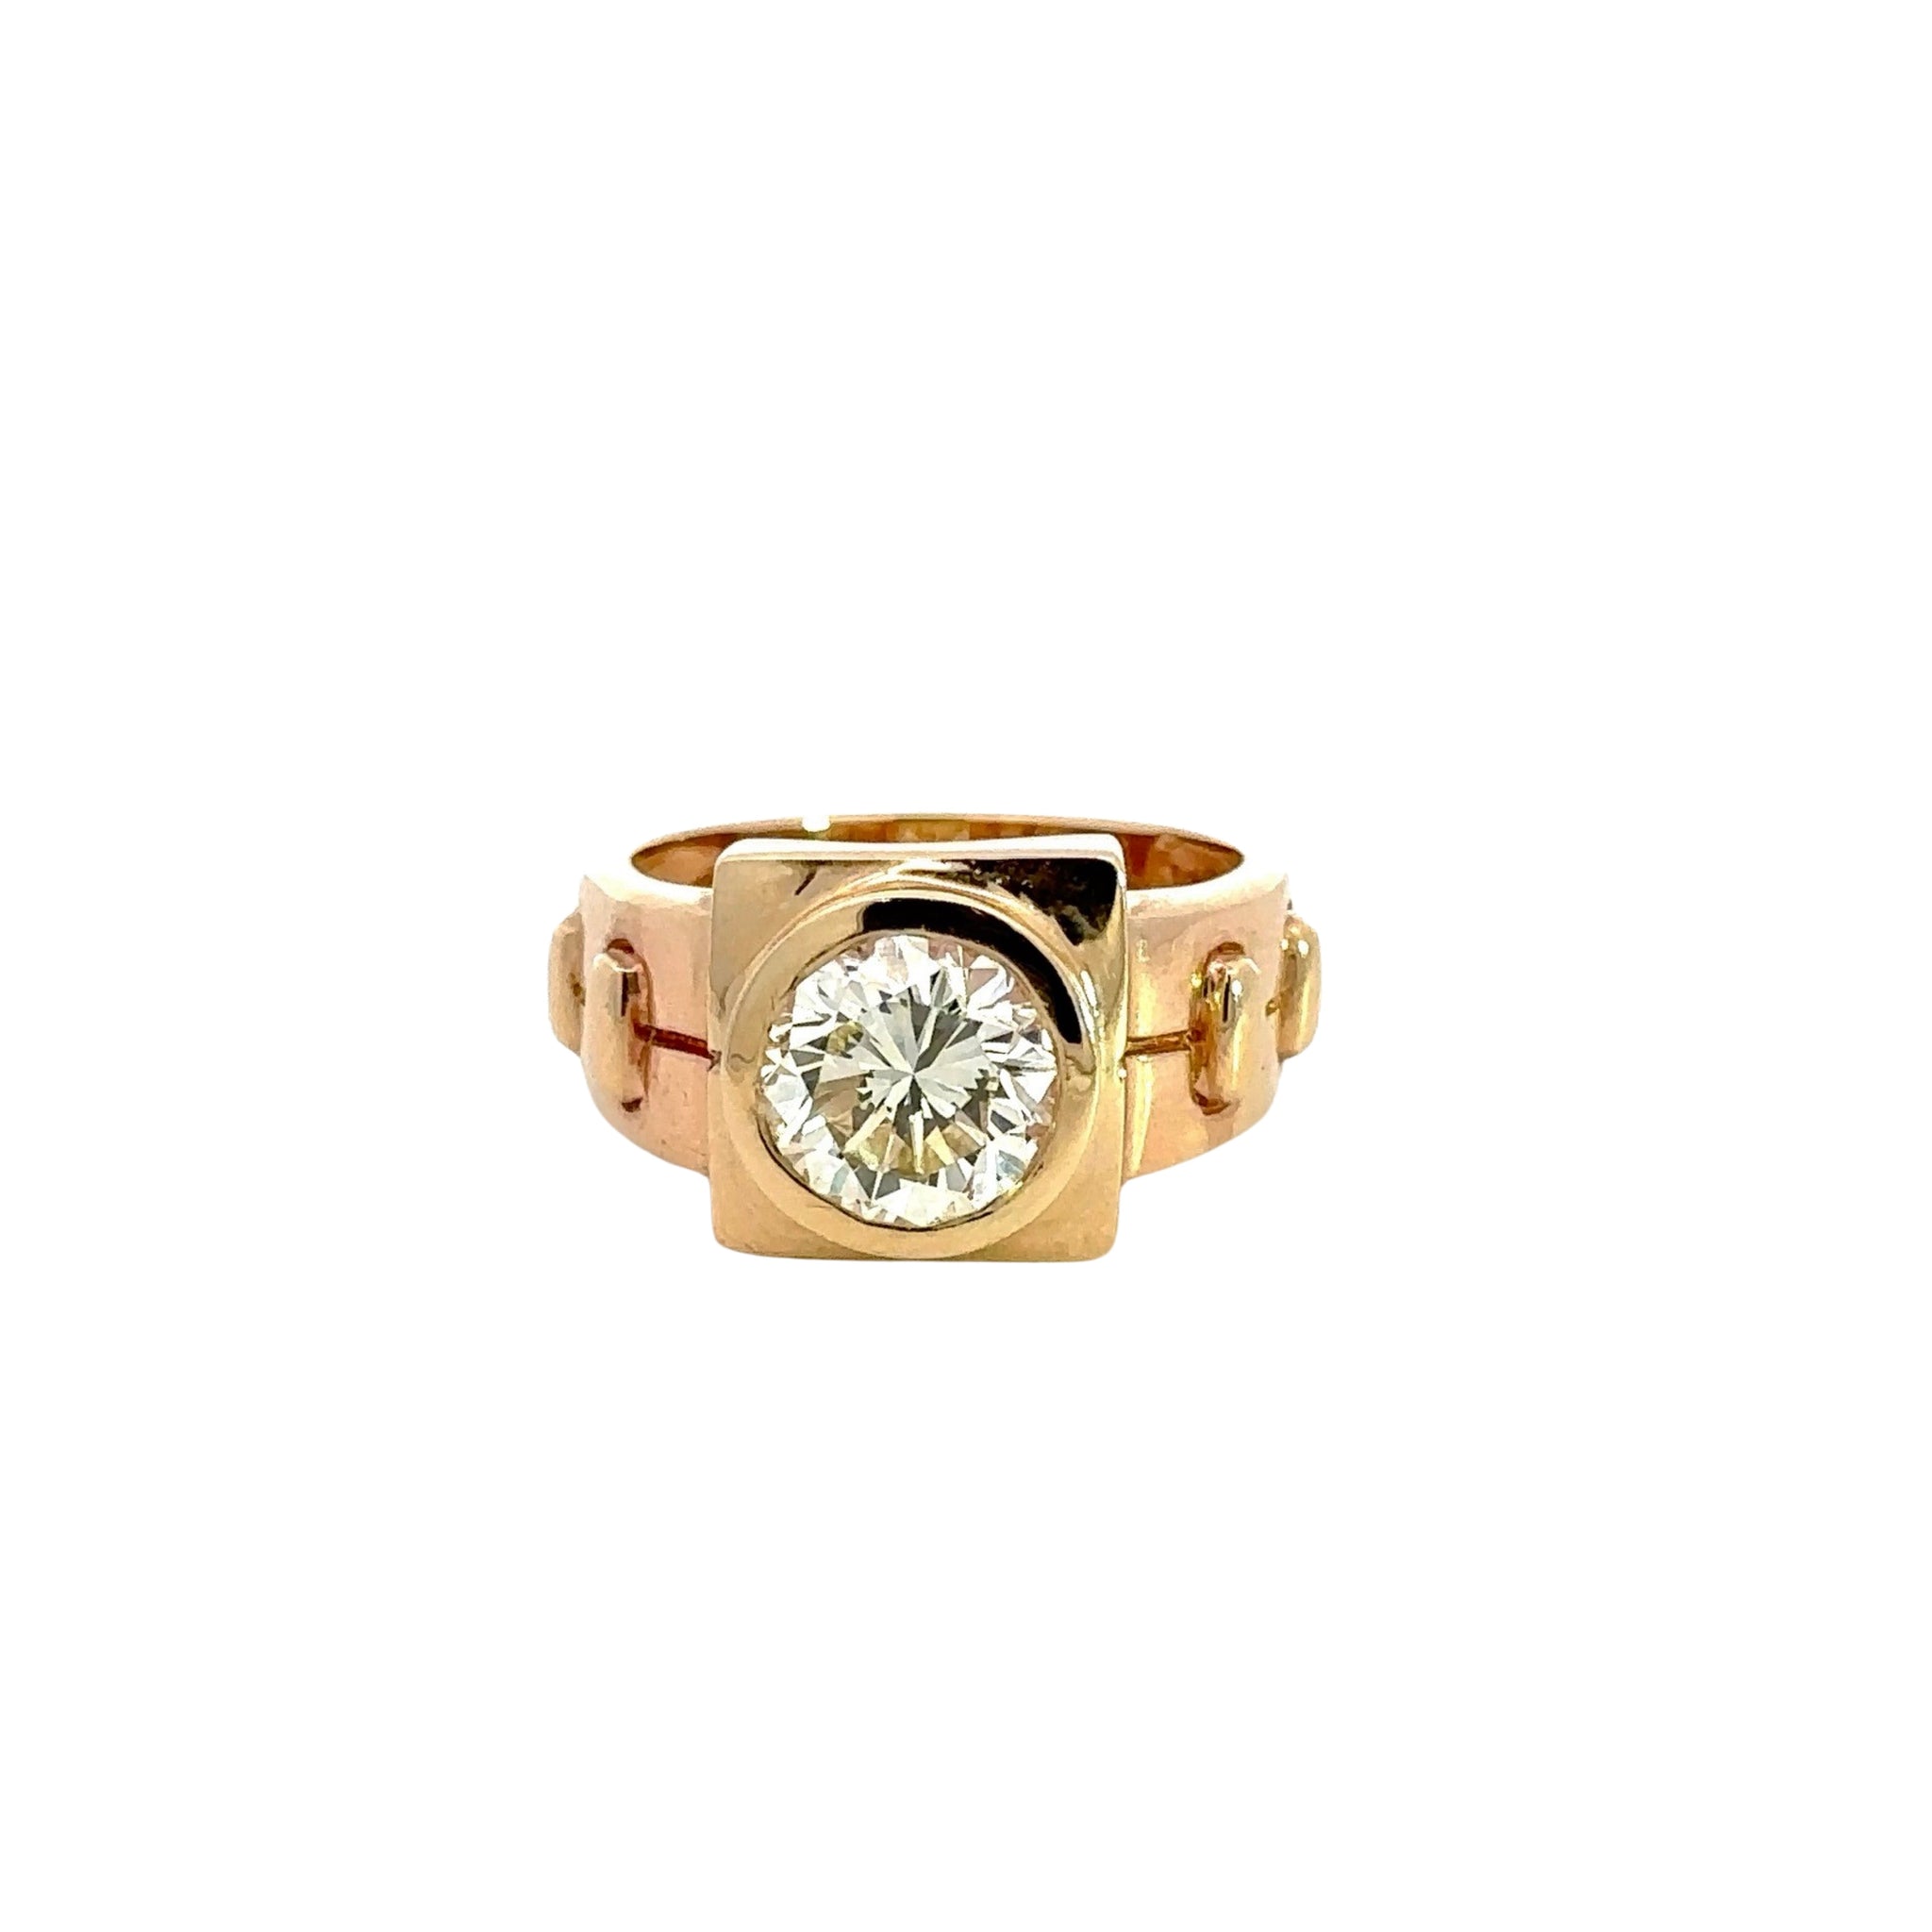 360 video of yellow gold diamond men's ring with a large 3.31 carat round brilliant diamond